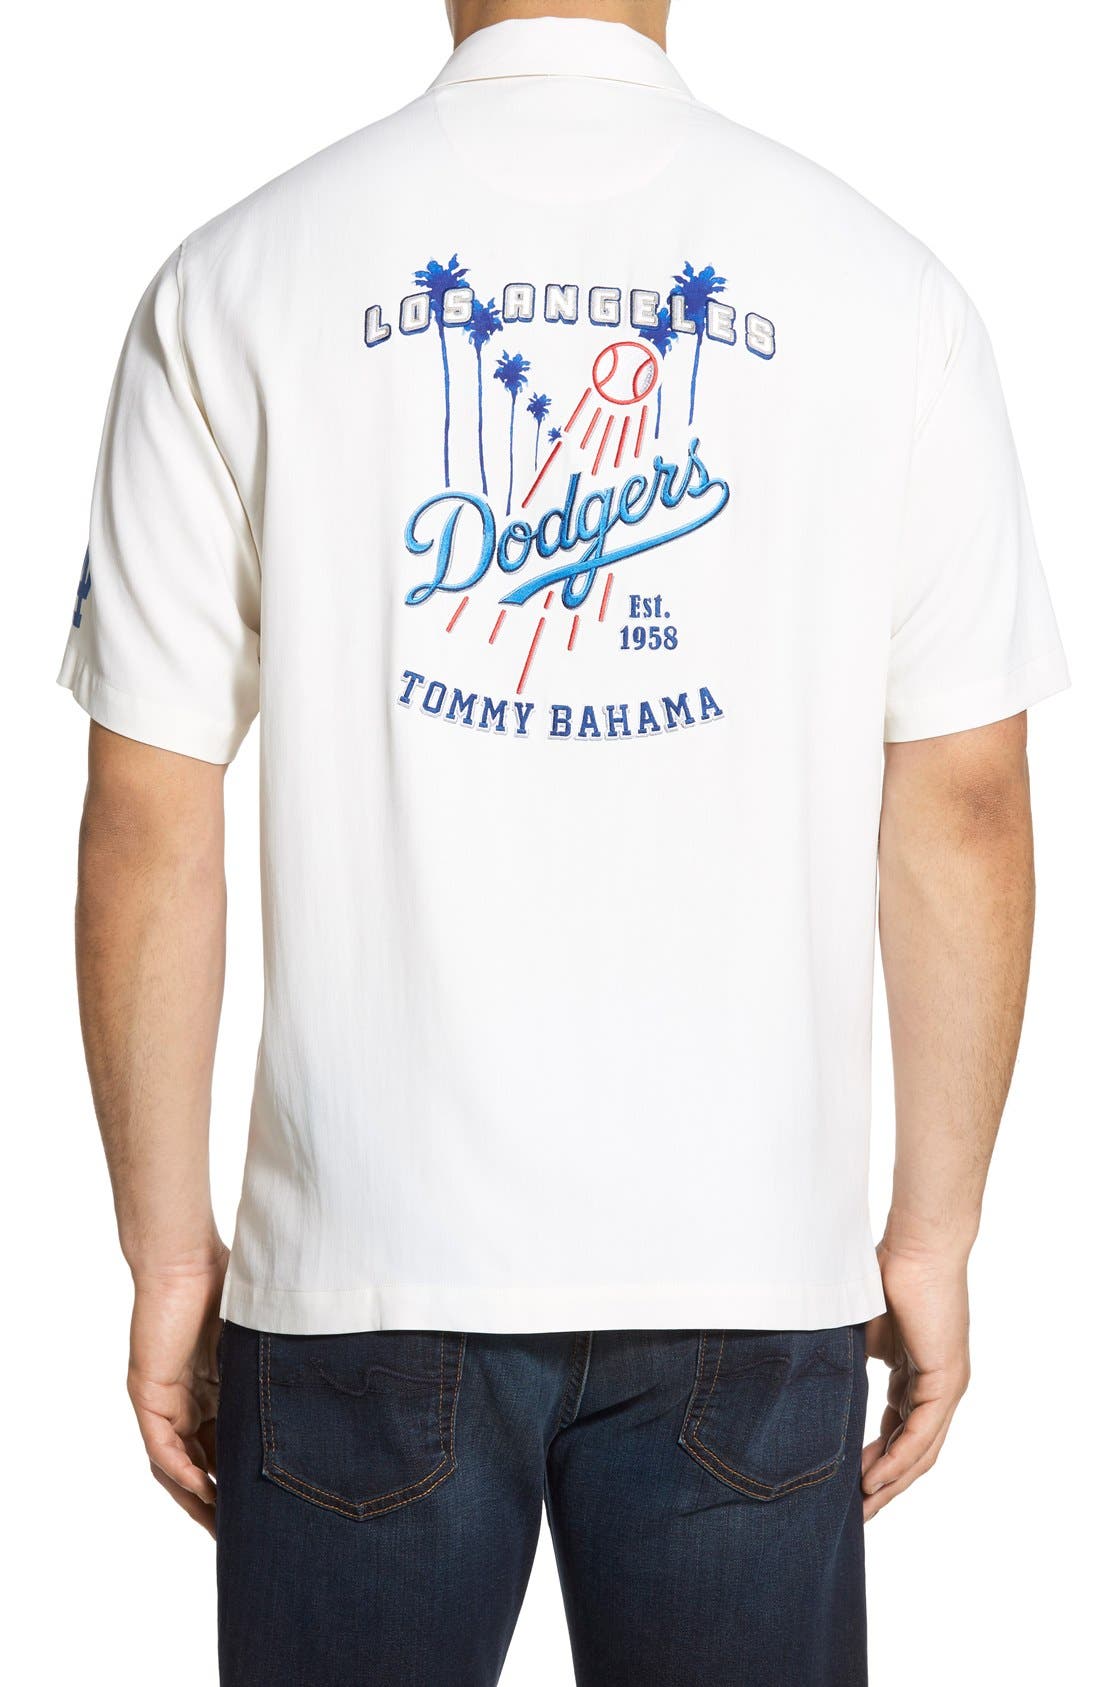 Tommy Bahama 'Los Angeles Dodgers' Silk 